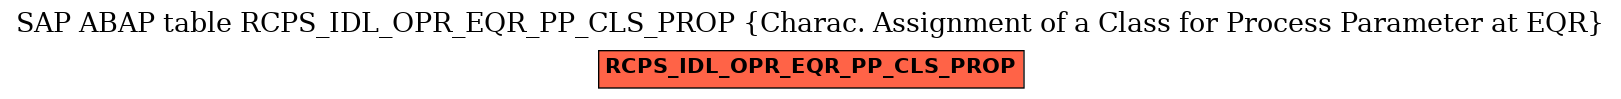 E-R Diagram for table RCPS_IDL_OPR_EQR_PP_CLS_PROP (Charac. Assignment of a Class for Process Parameter at EQR)